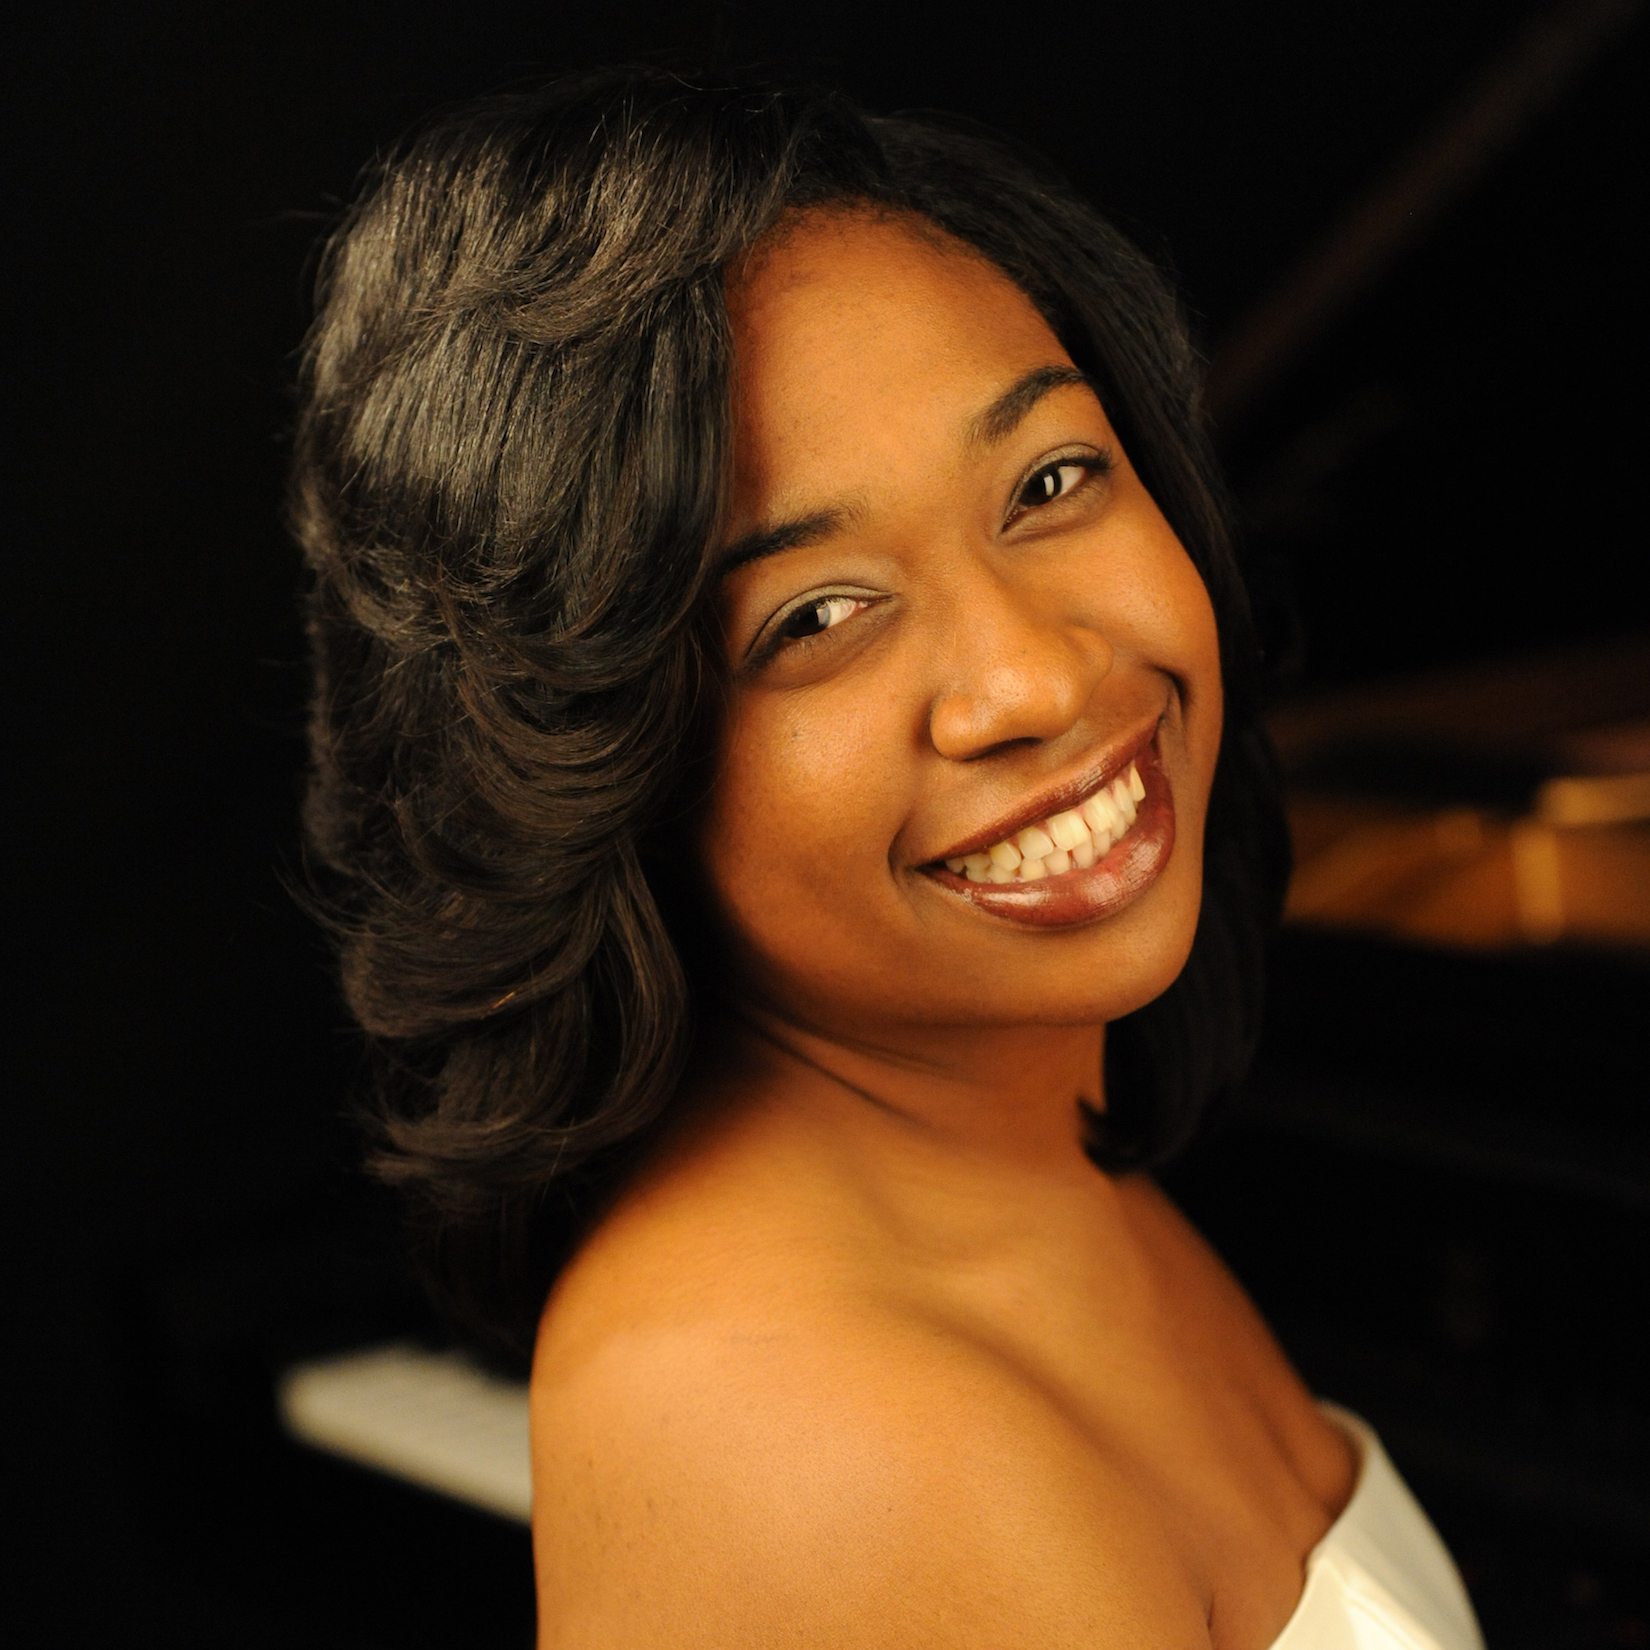 Pianist Michelle Cann made her orchestral debut at age fourteen and has since performed as a soloist with numerous ensembles including The Philadelphia Orchestra, The Cleveland Orchestra, the Florida Orchestra, the North Carolina Symphony, and the New Jersey Orchestra. Her ‘exquisite, authoritative’ performances have reintroduced Price to audiences and critics alike. 